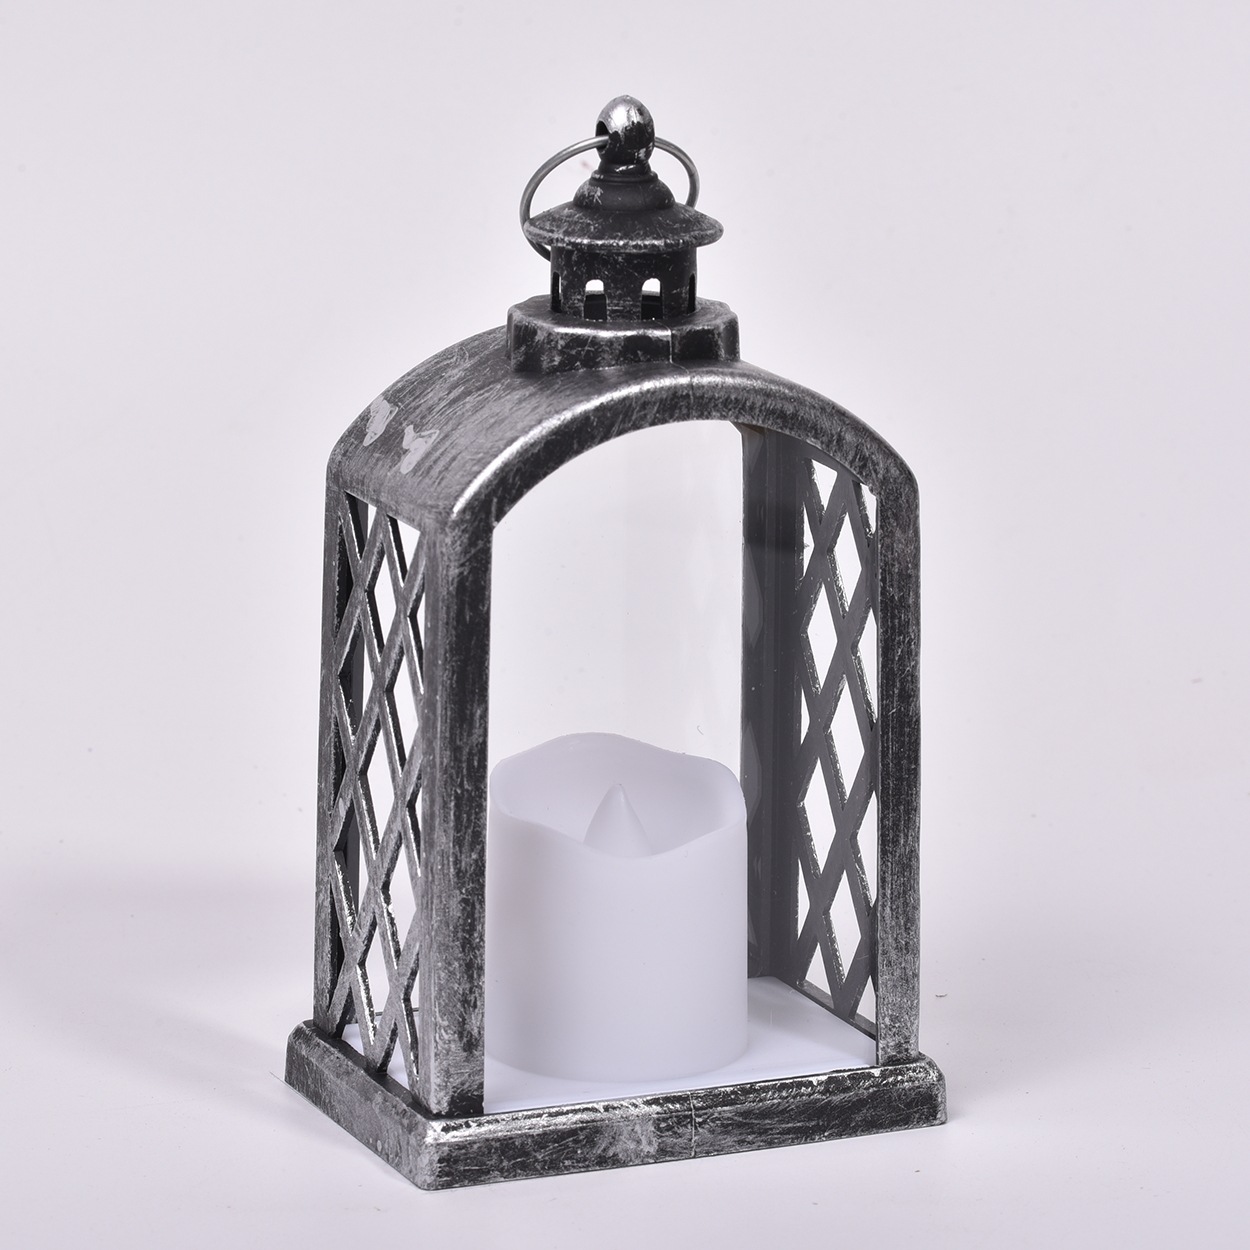 Storm Lantern Decorative Small Night Lamp Electronic Candle LED Lamp Ambience Light Photography Shooting Props Decorative Candle Wholesale